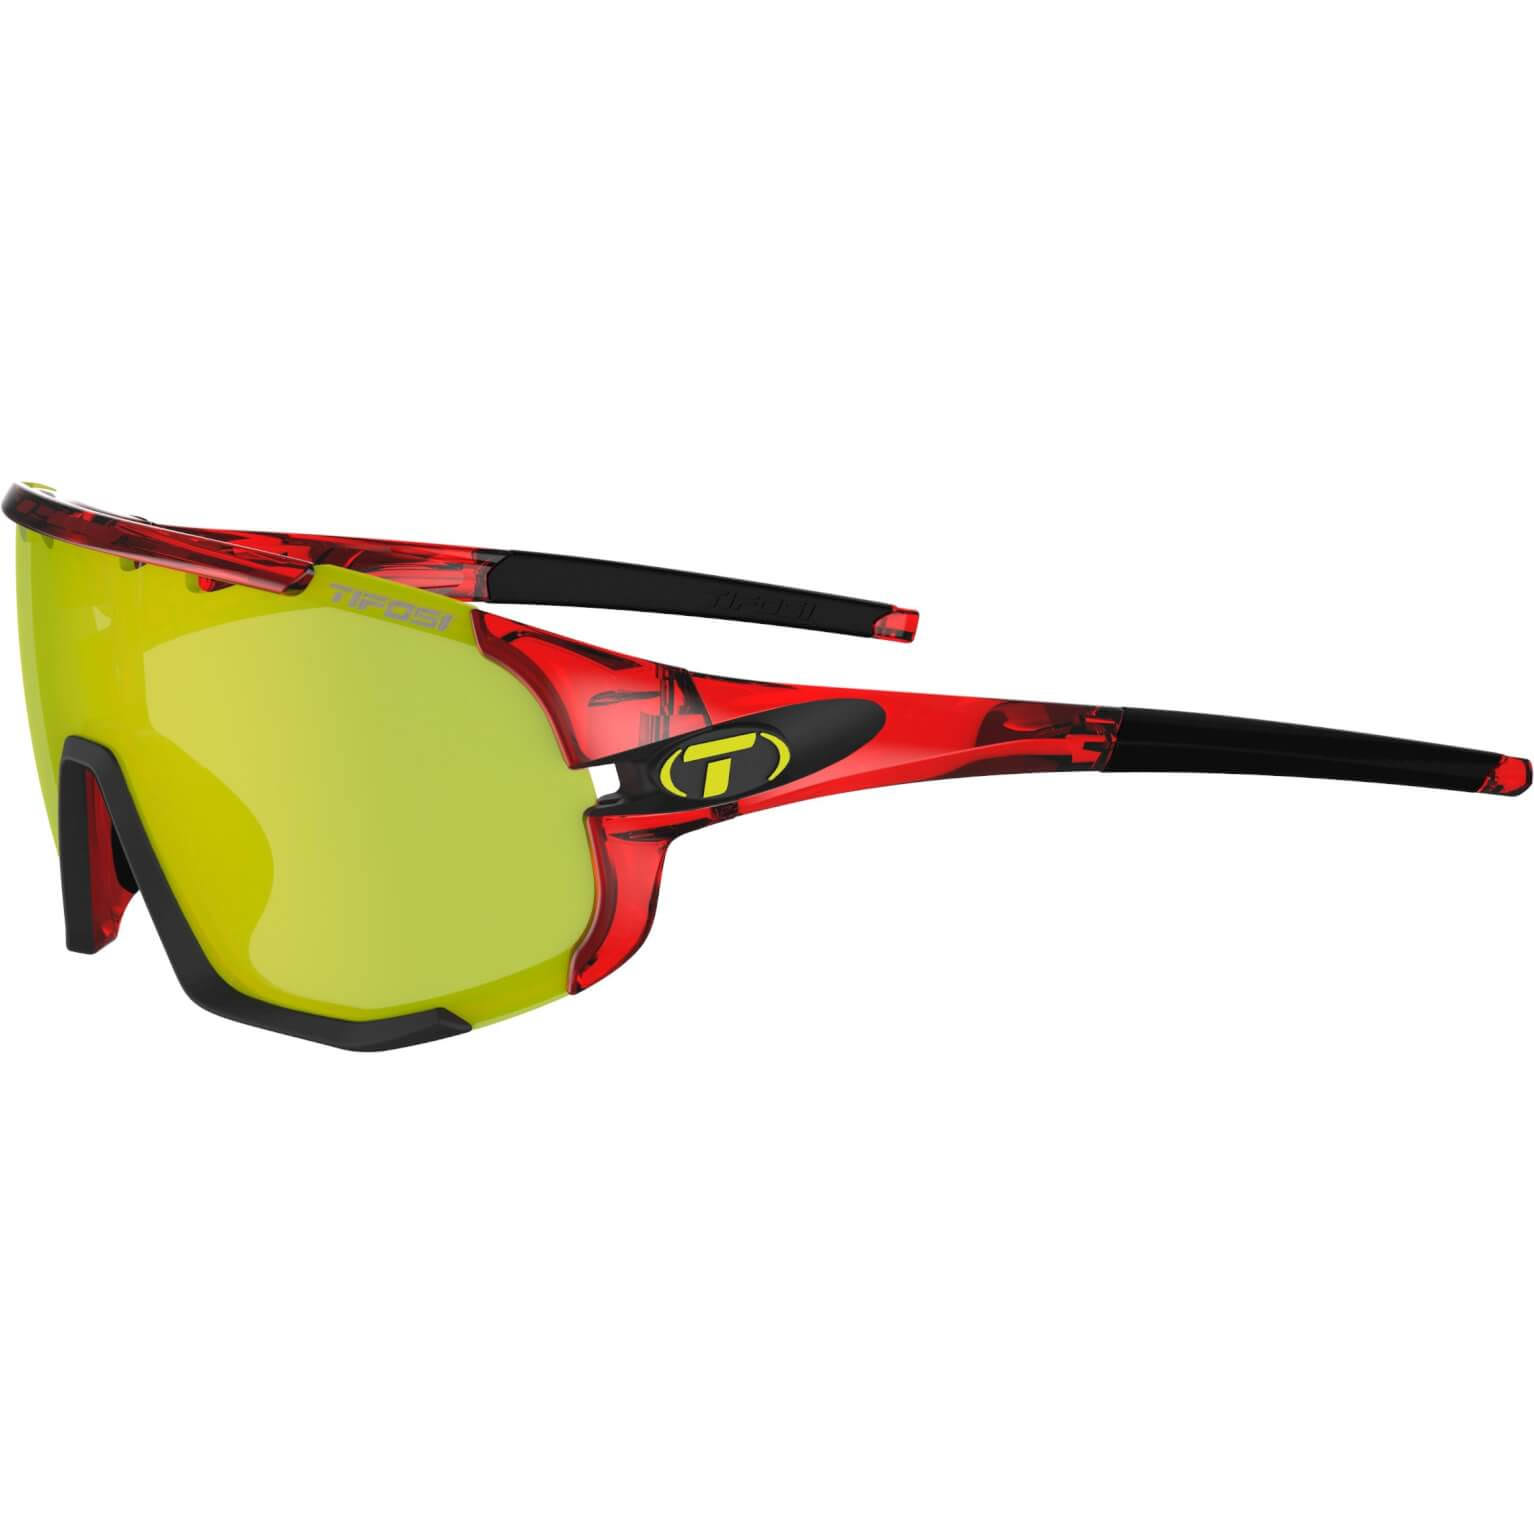 Tifosi Sledge - Interchangeable - Clarion Lens Sunglasses, Crystal Red